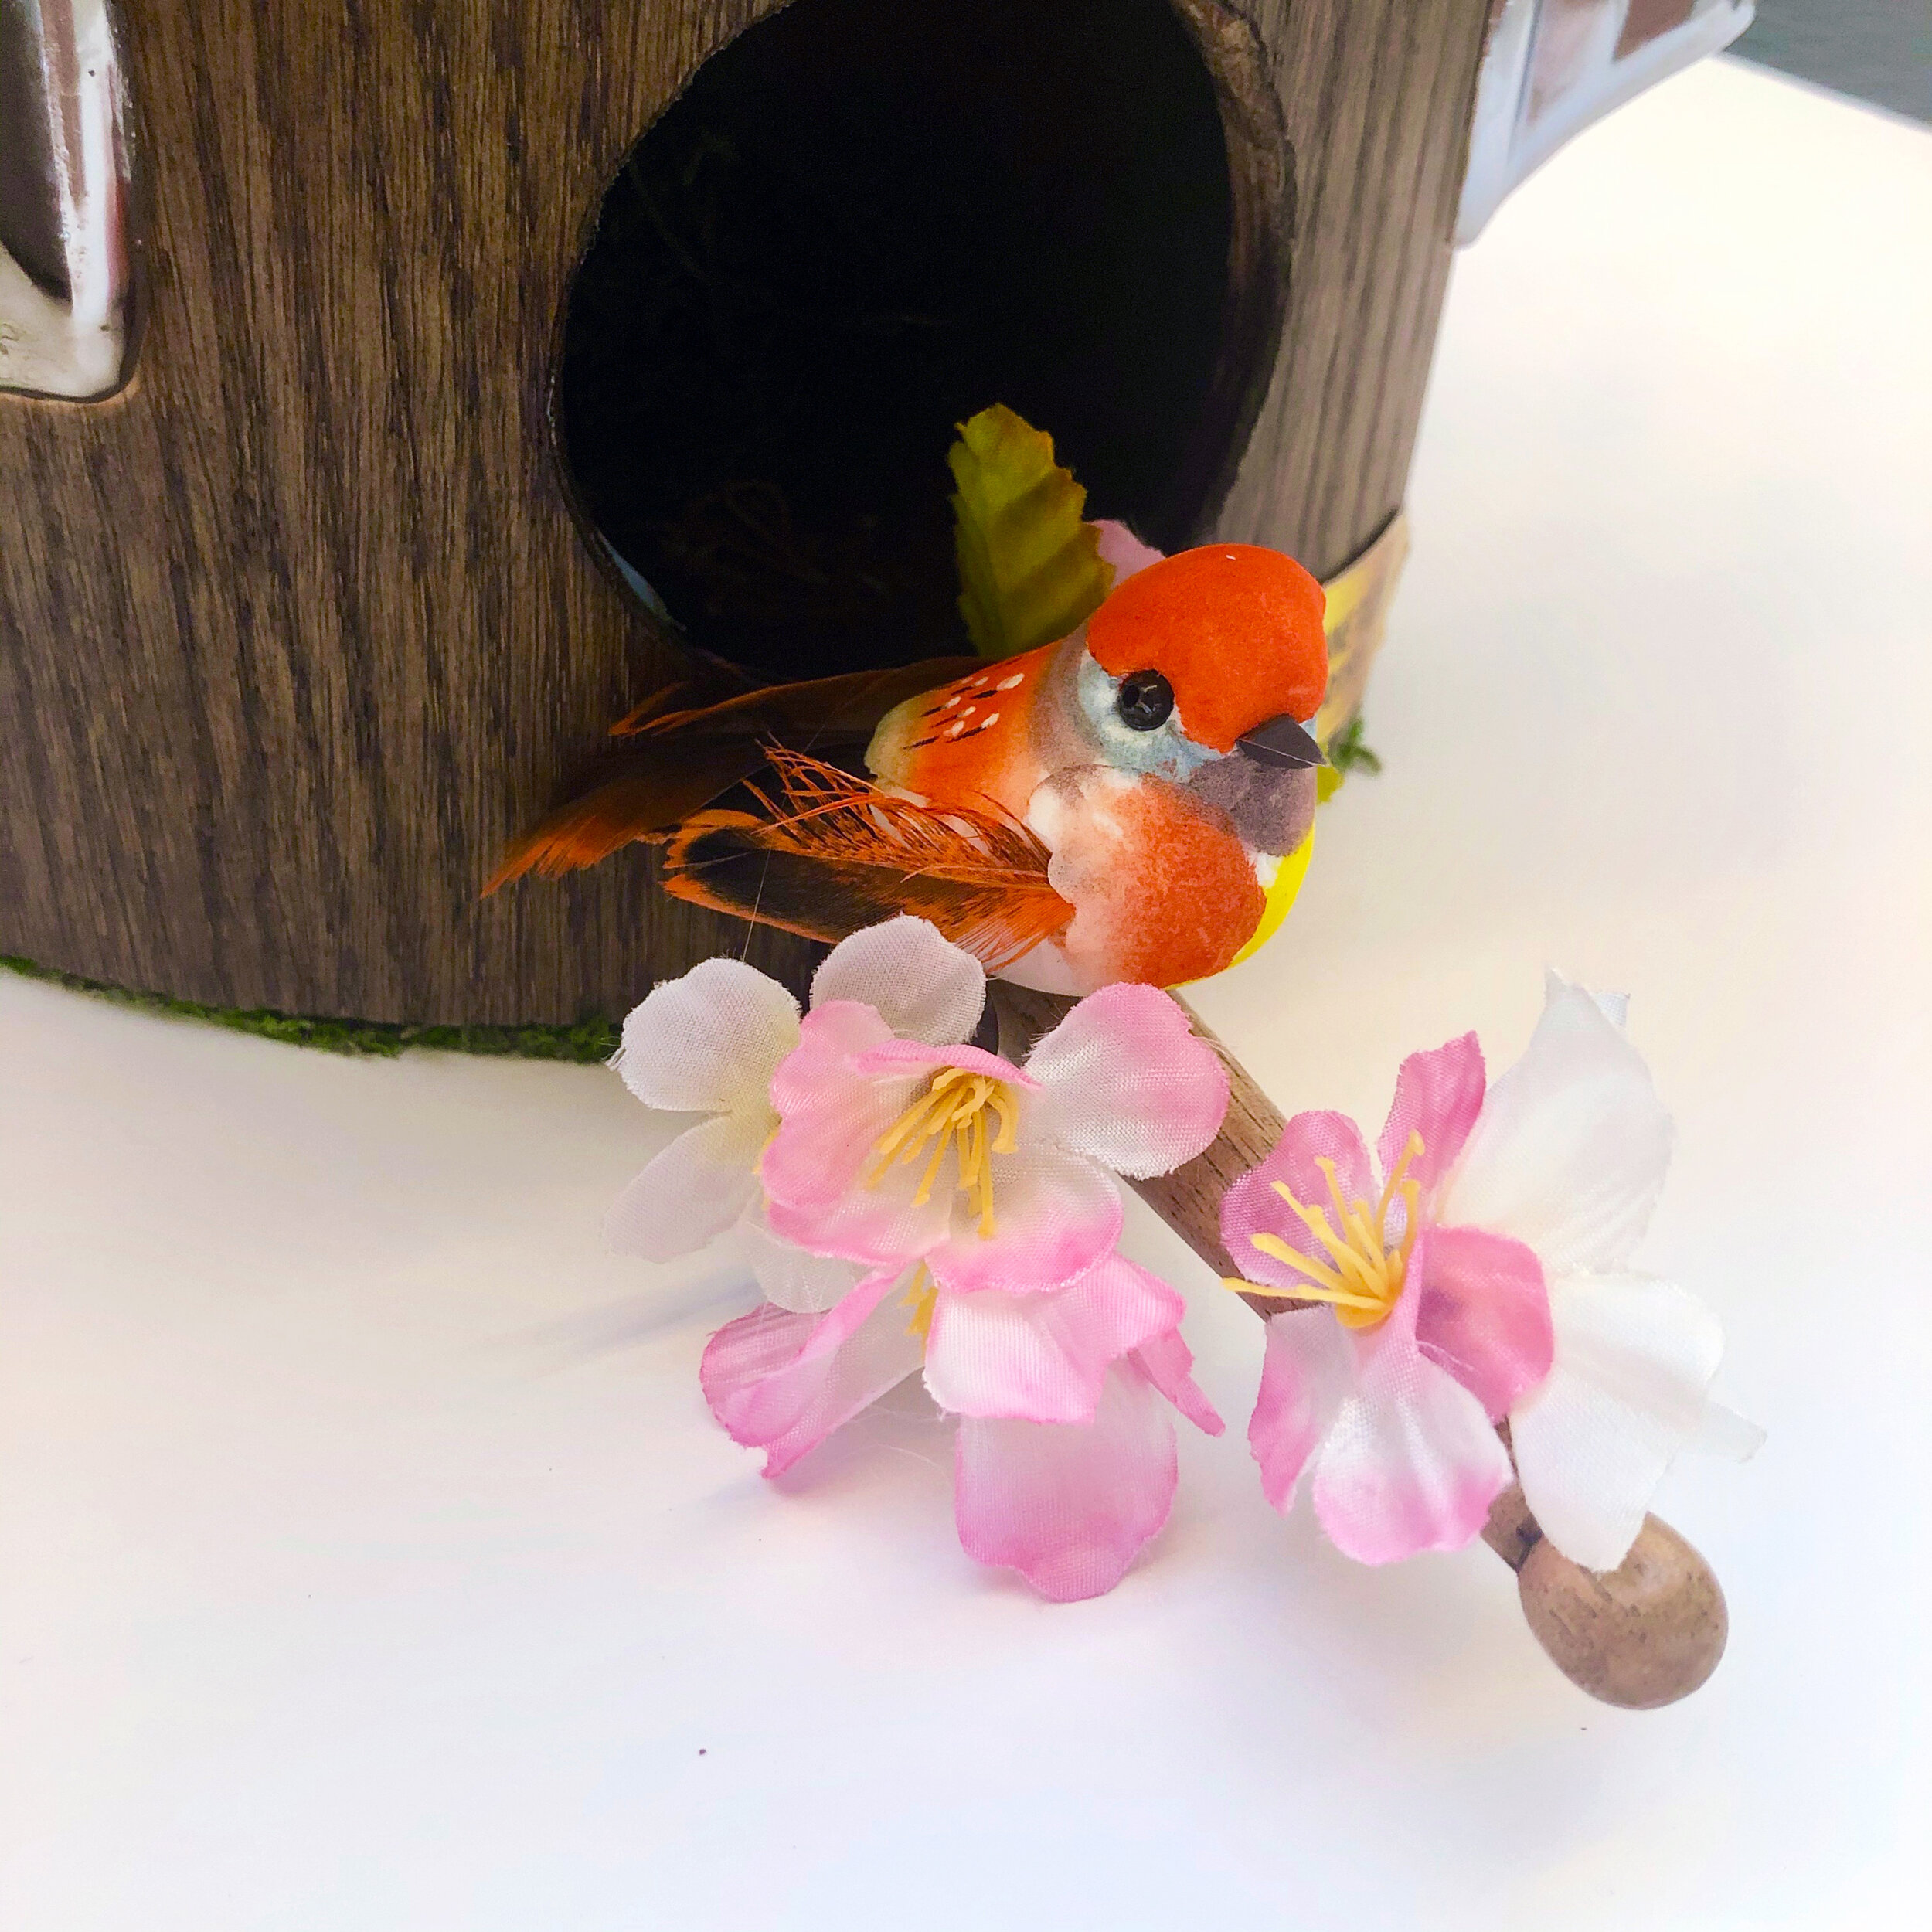 Drum Themed Birdhouse with Drumstick Perch and Cherry Blossoms, 2019